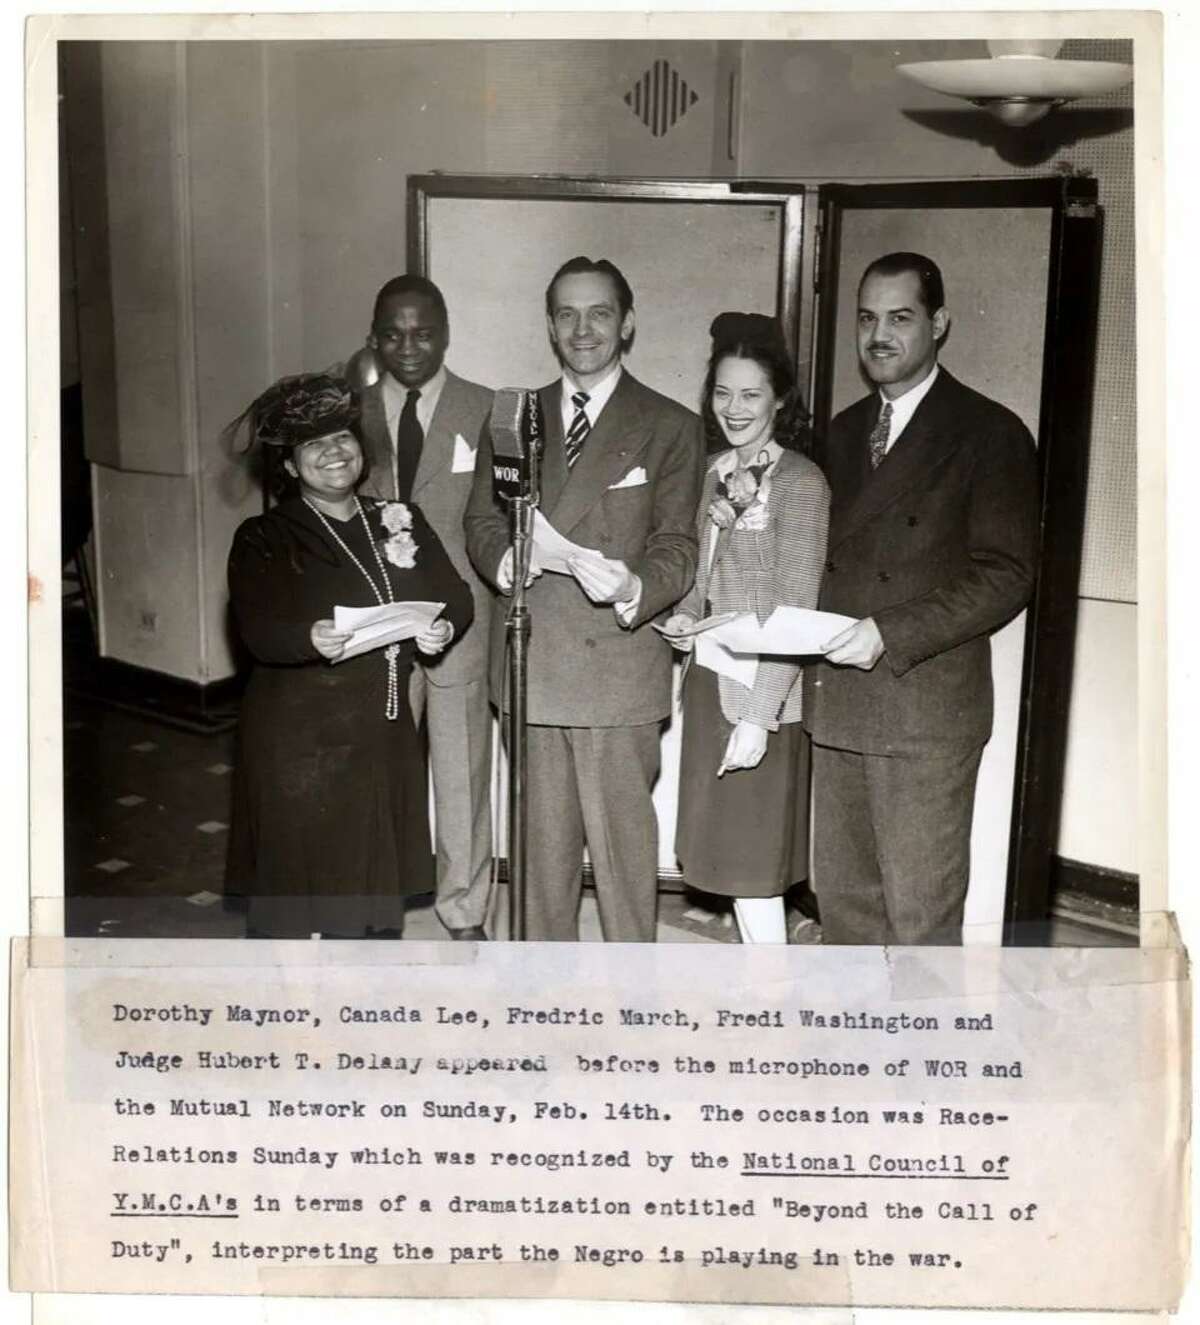 Fredric March, center, takes part in a national Race Relations Sunday radio program in 1942 with, from the left, soprano Dorothy Maynor, actor Canada Lee, actress Fredi Washington and Judge Hubert T. Delany.